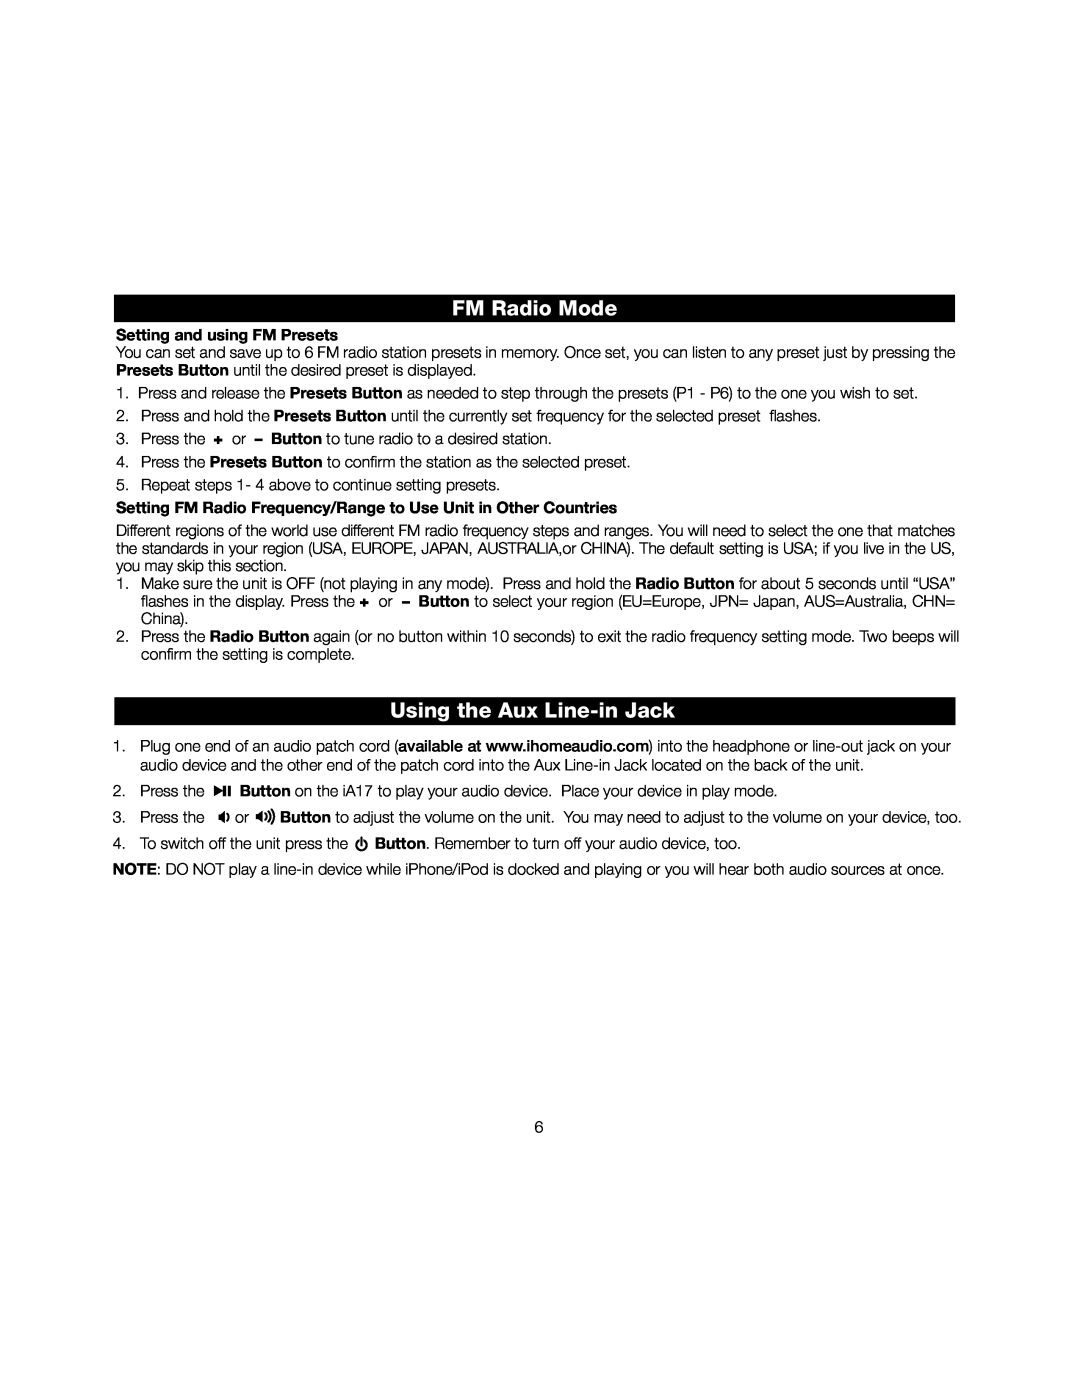 iHome iA17 instruction manual Using the Aux Line-in Jack, FM Radio Mode, Setting and using FM Presets 